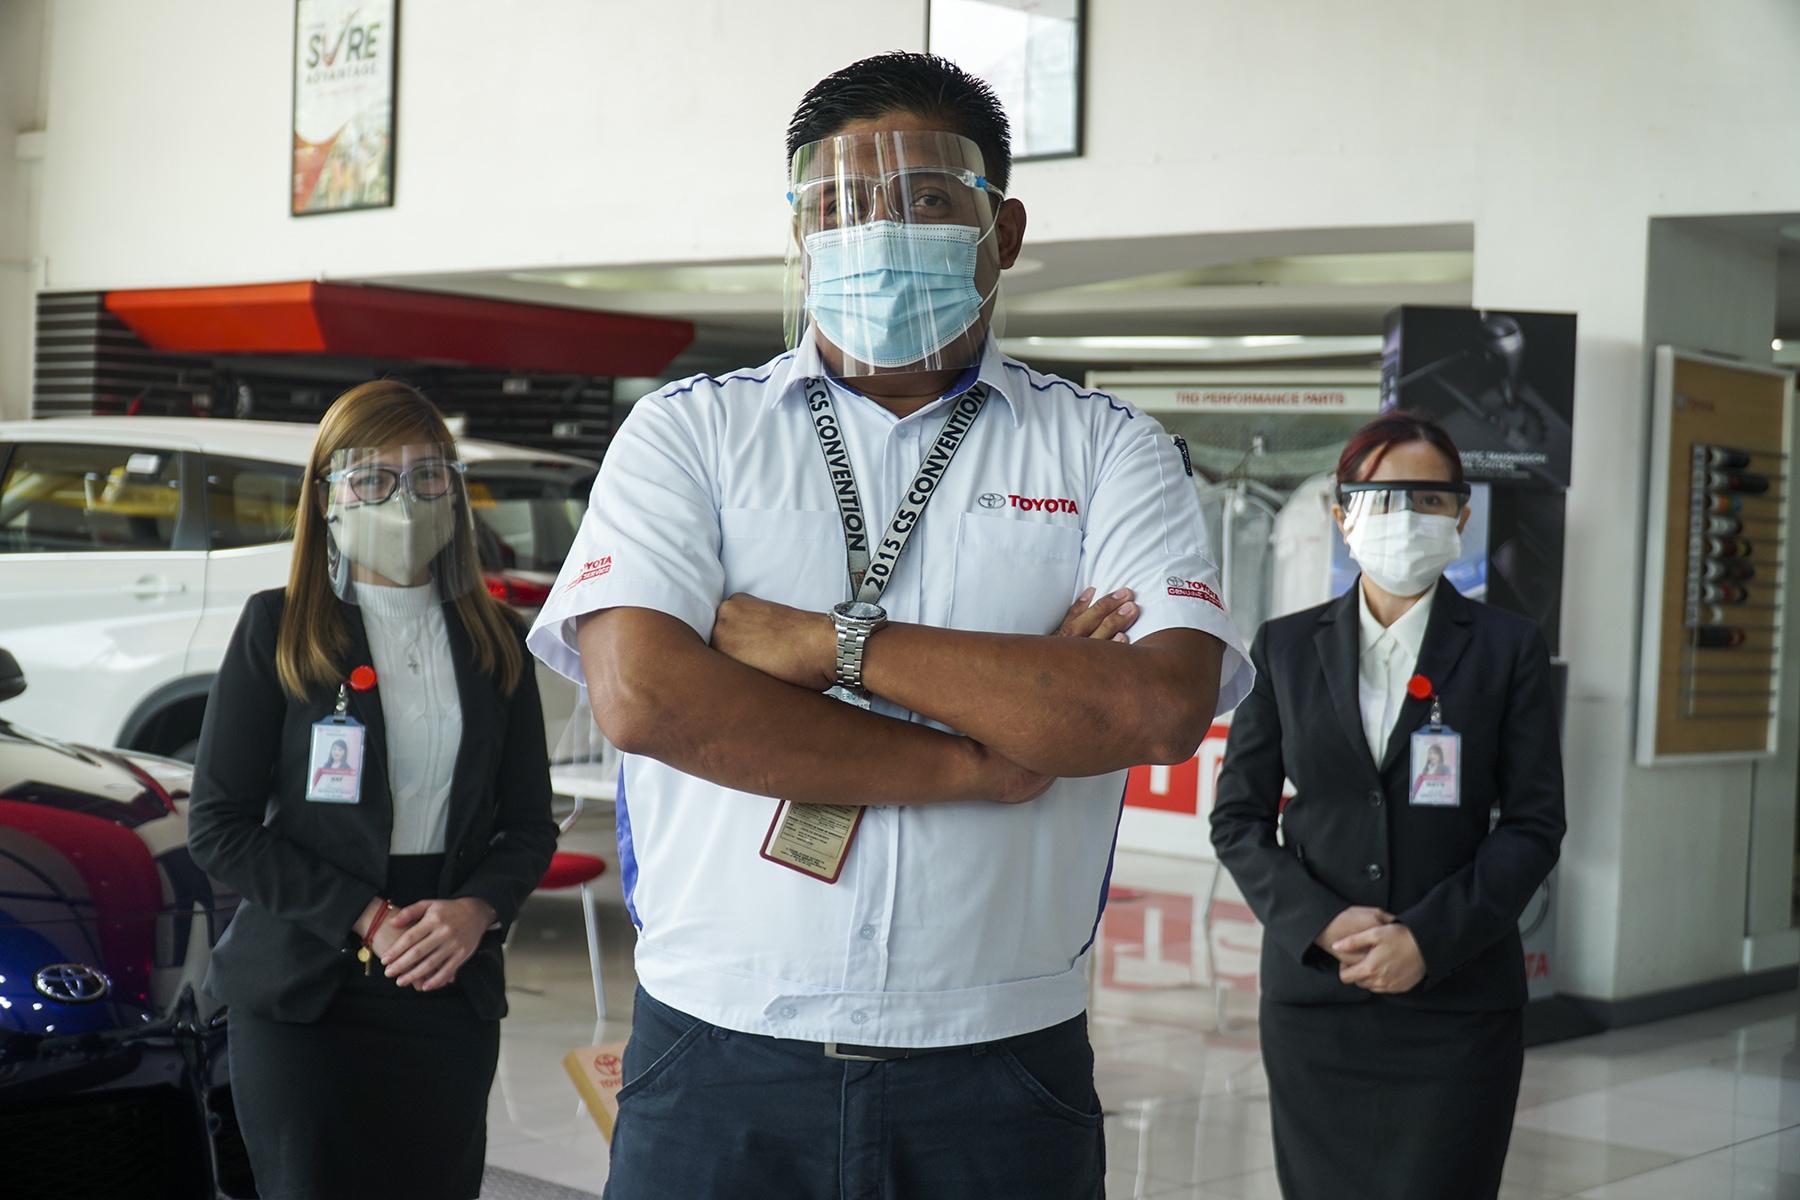 Toyota dealerships remain “at your service” amid the pandemic